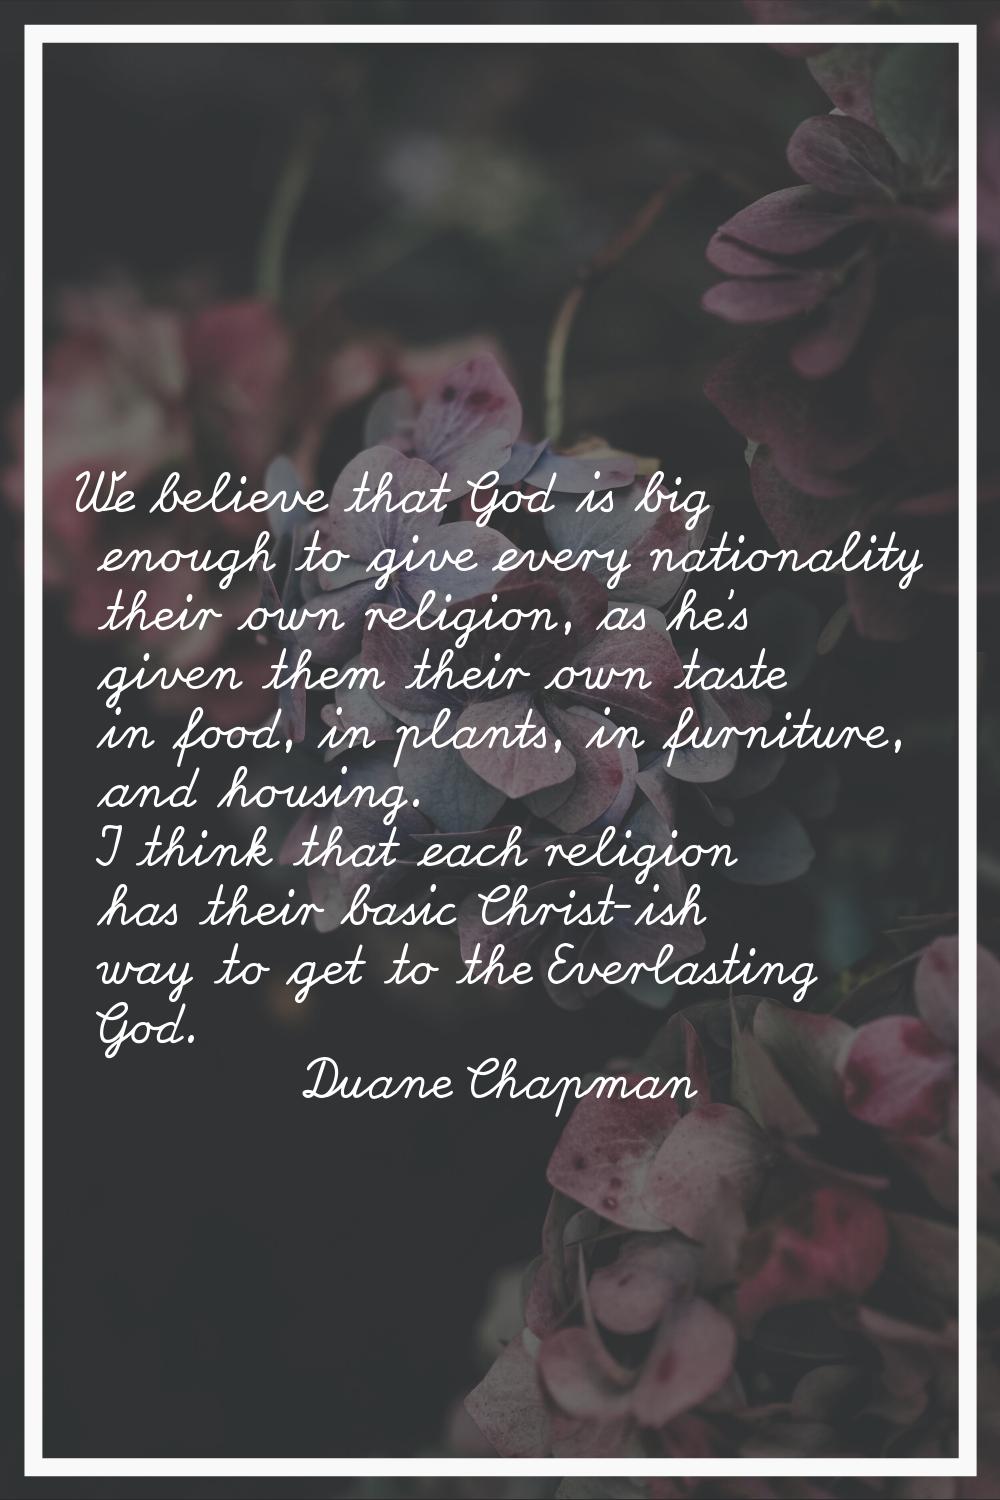 We believe that God is big enough to give every nationality their own religion, as he's given them 